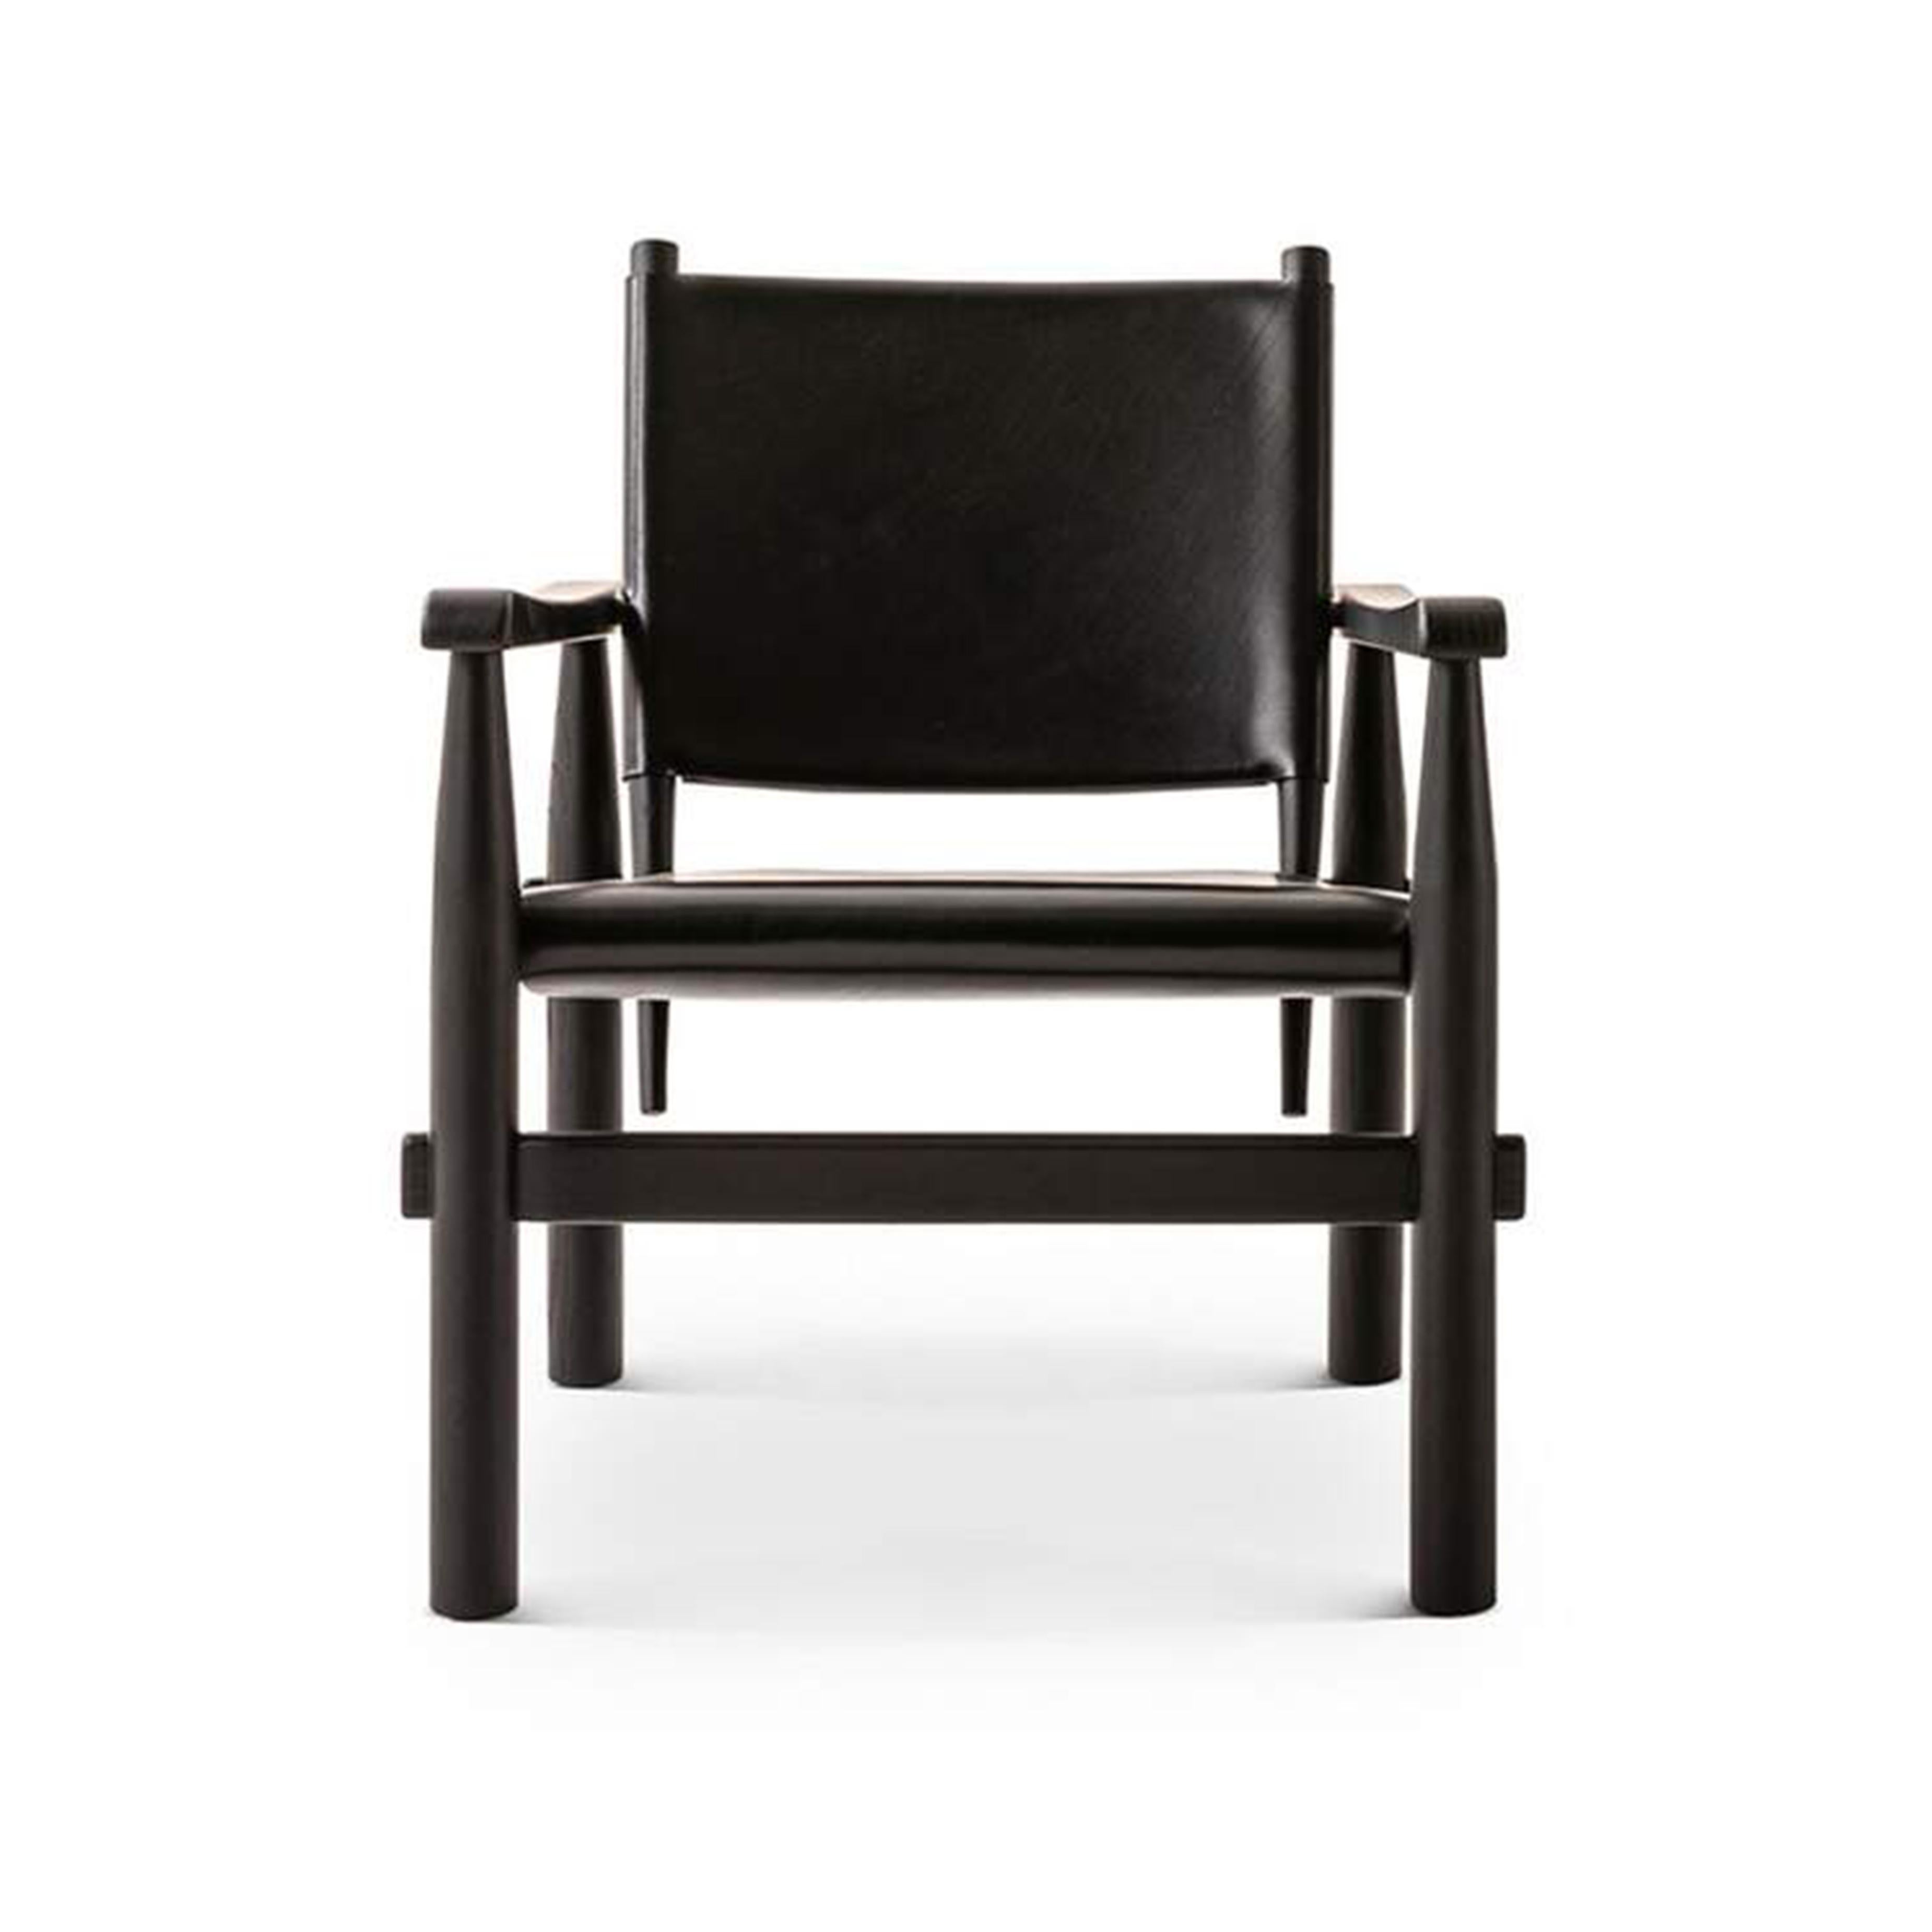 Italian Set of Two Charlotte Perriand 533 Doron Hotel Armchair by Cassina For Sale